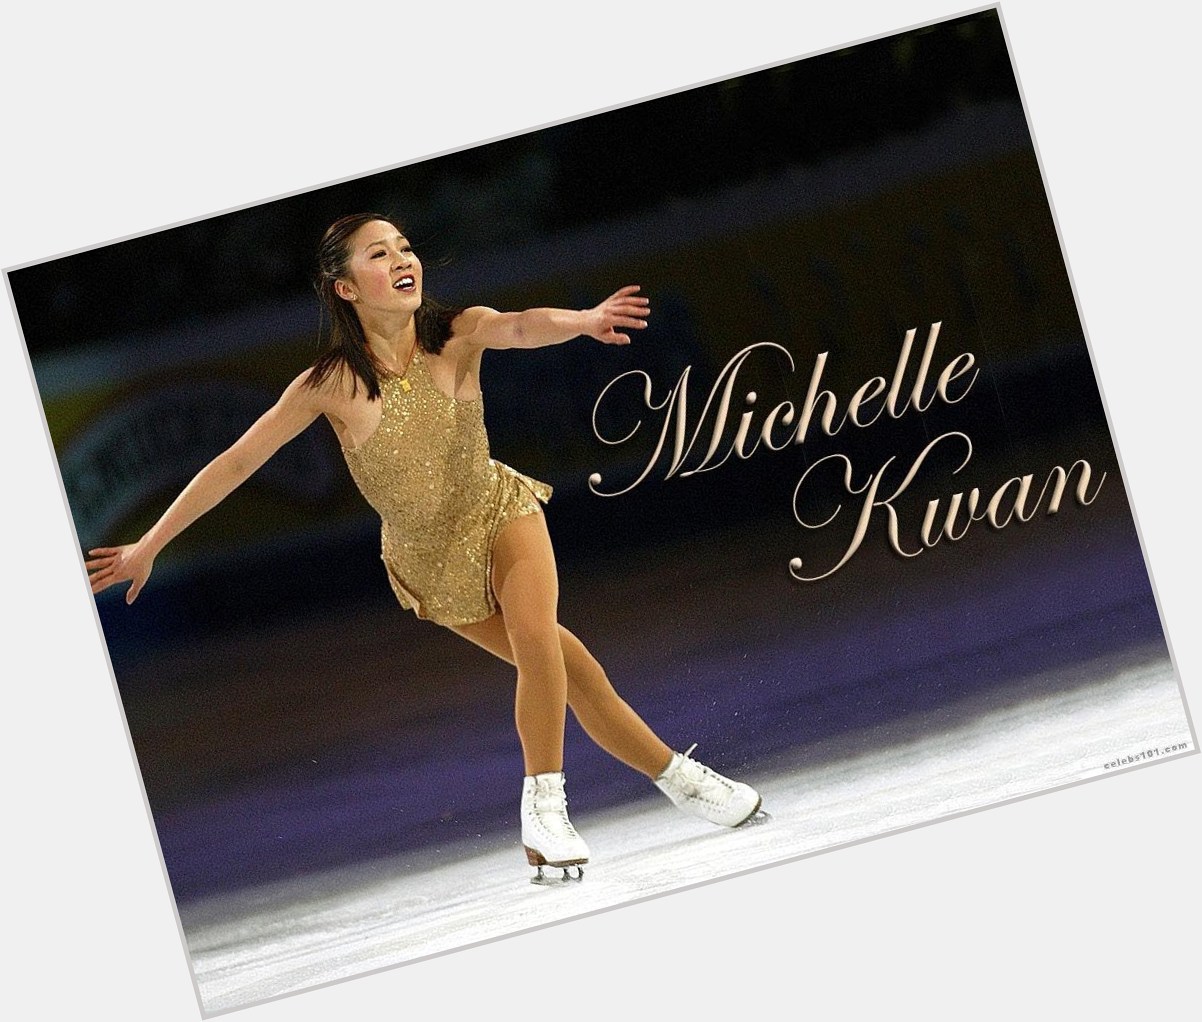 Happy Birthday to Michelle Kwan, who turns 37 today! 